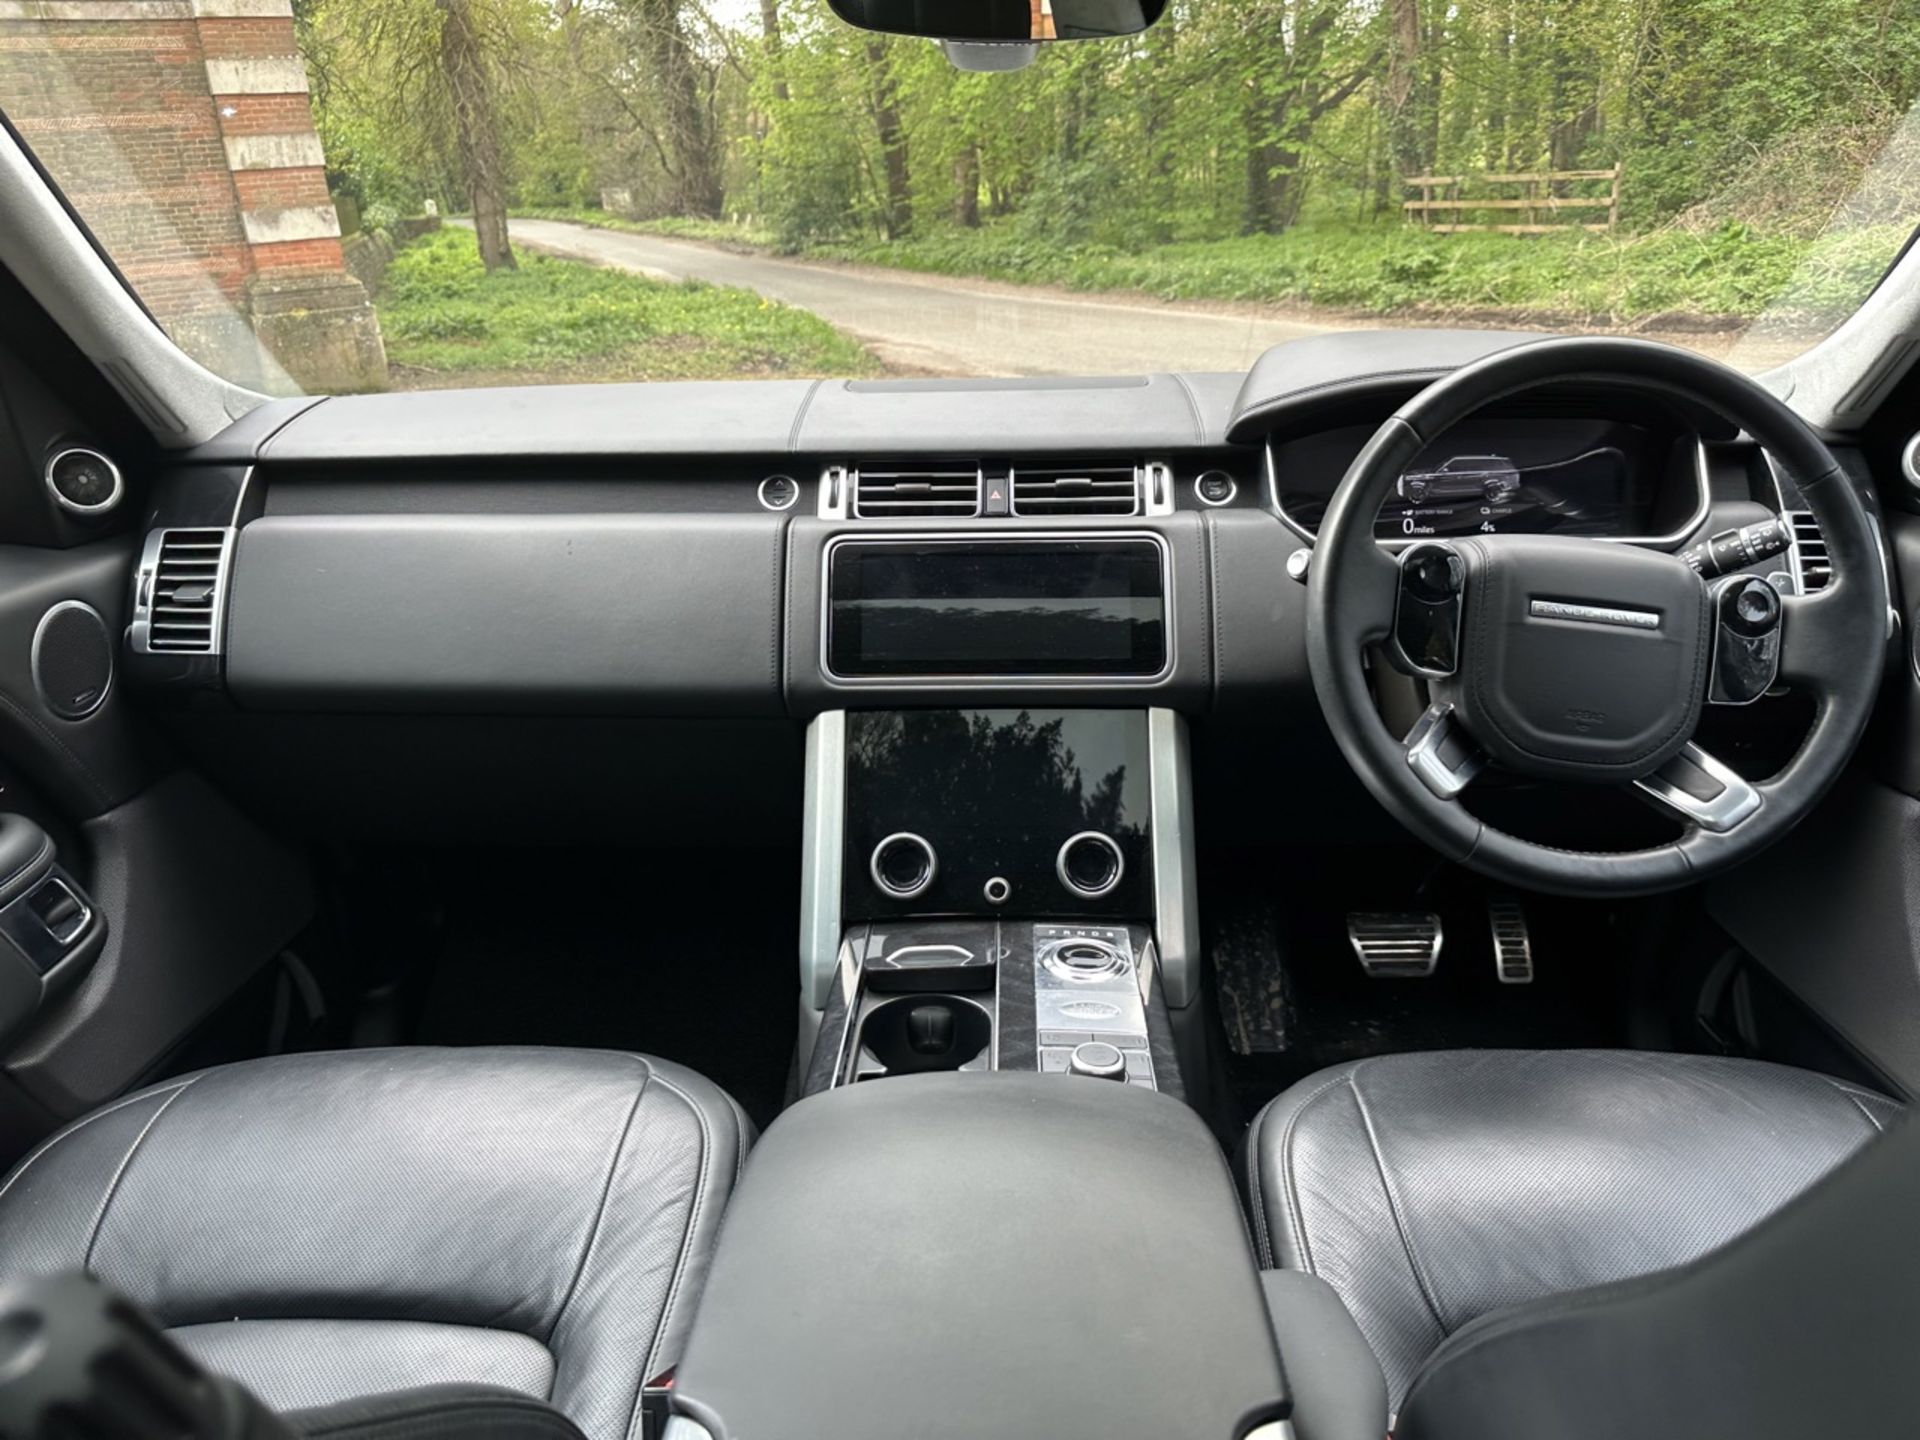 LAND ROVER RANGE ROVER 2.0 P400e Autobiography 4dr Auto - Automatic - 2018 - 31k miles - FULL SH - Image 16 of 22